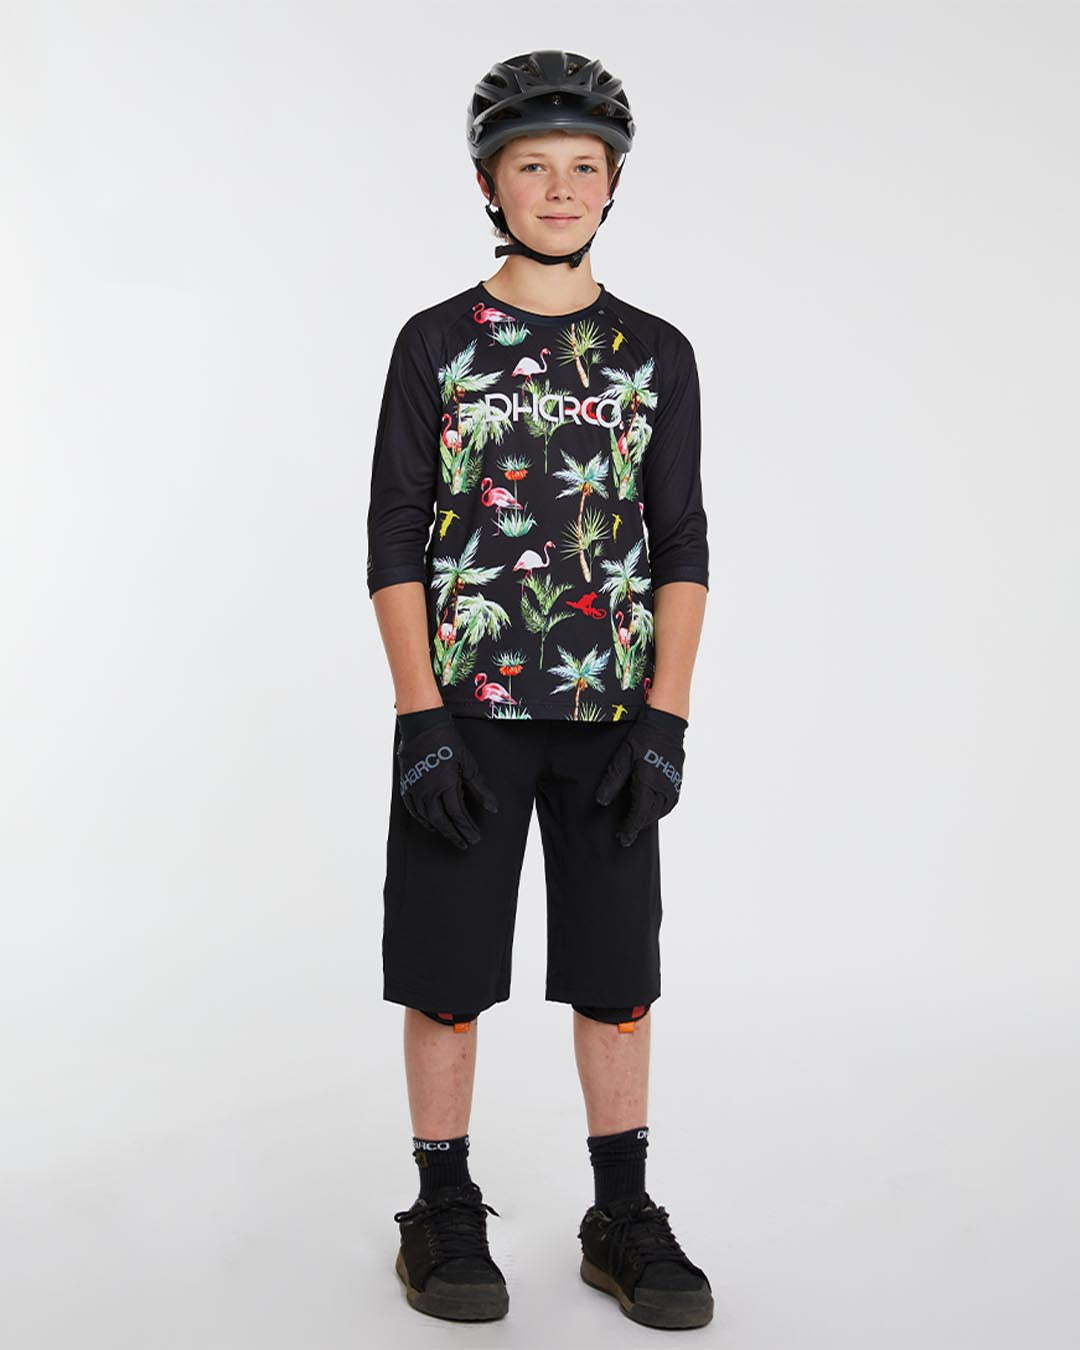 Youth 3/4 Sleeve Jersey | Party